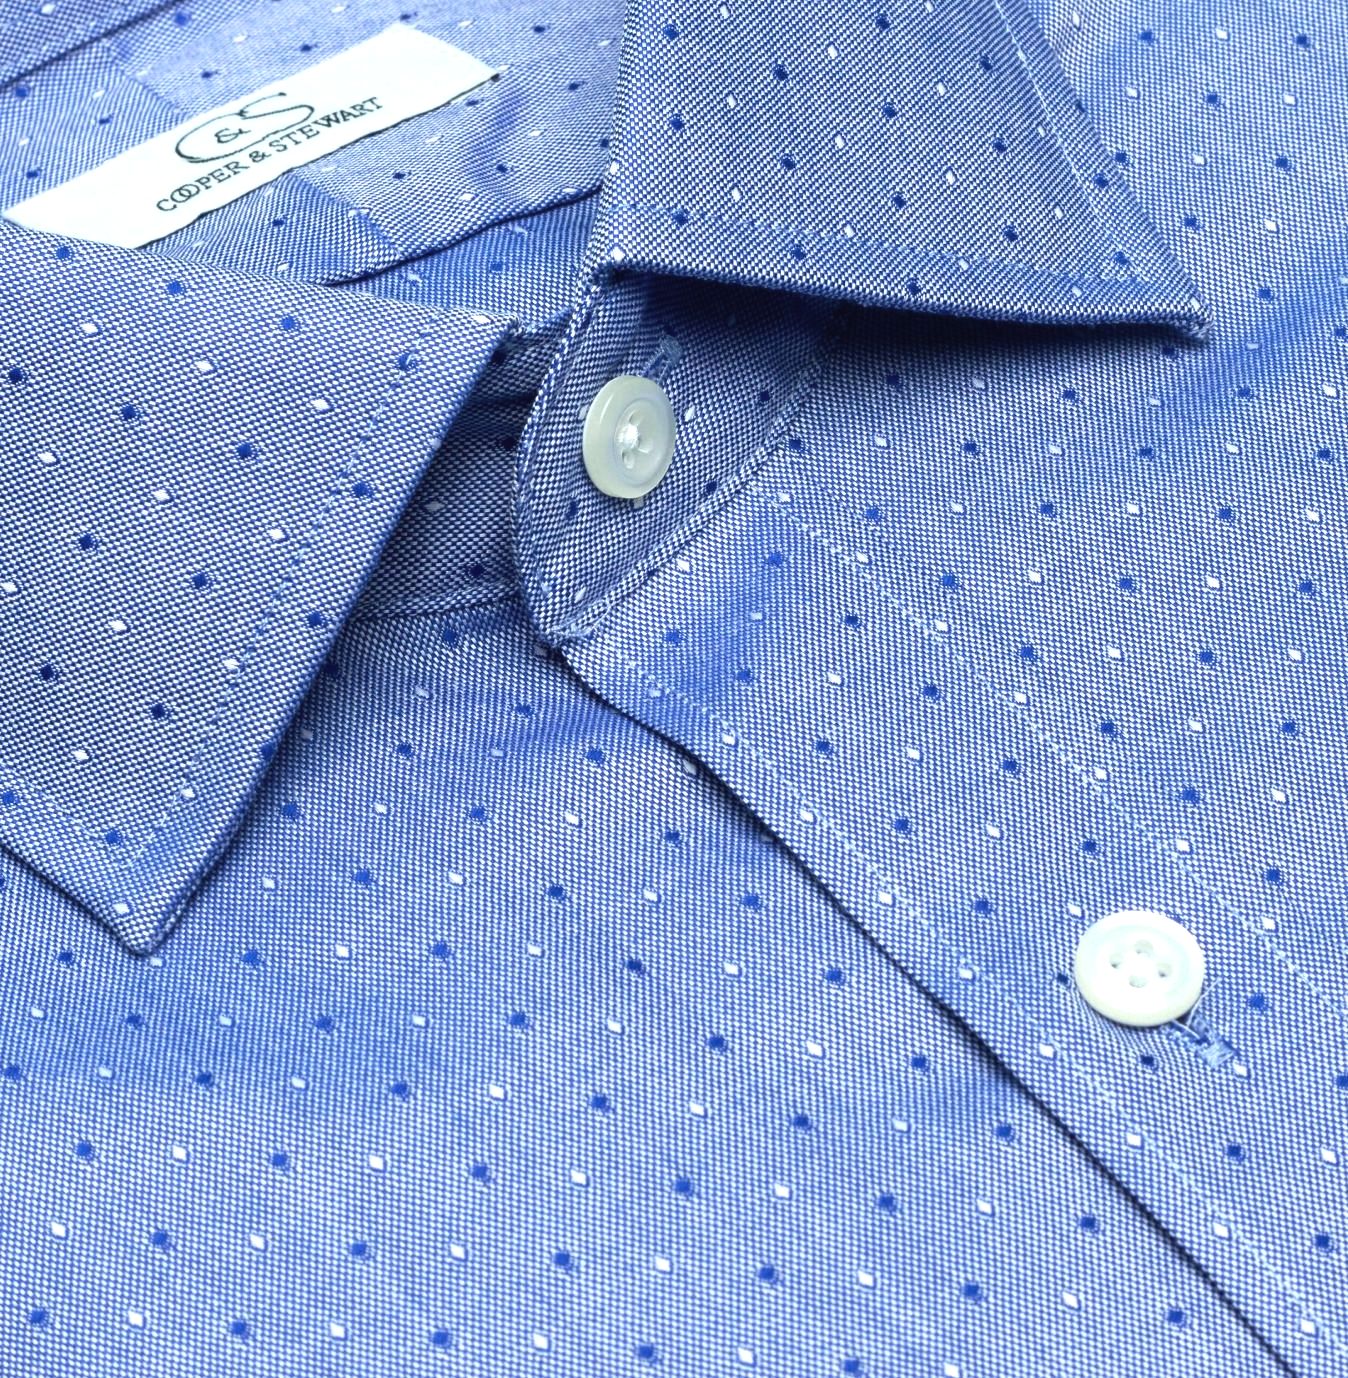 Blue Dobby Clip Dot Stretch Cotton Wrinkle-Free Dress Shirt with Spread Collar by Cooper & Stewart